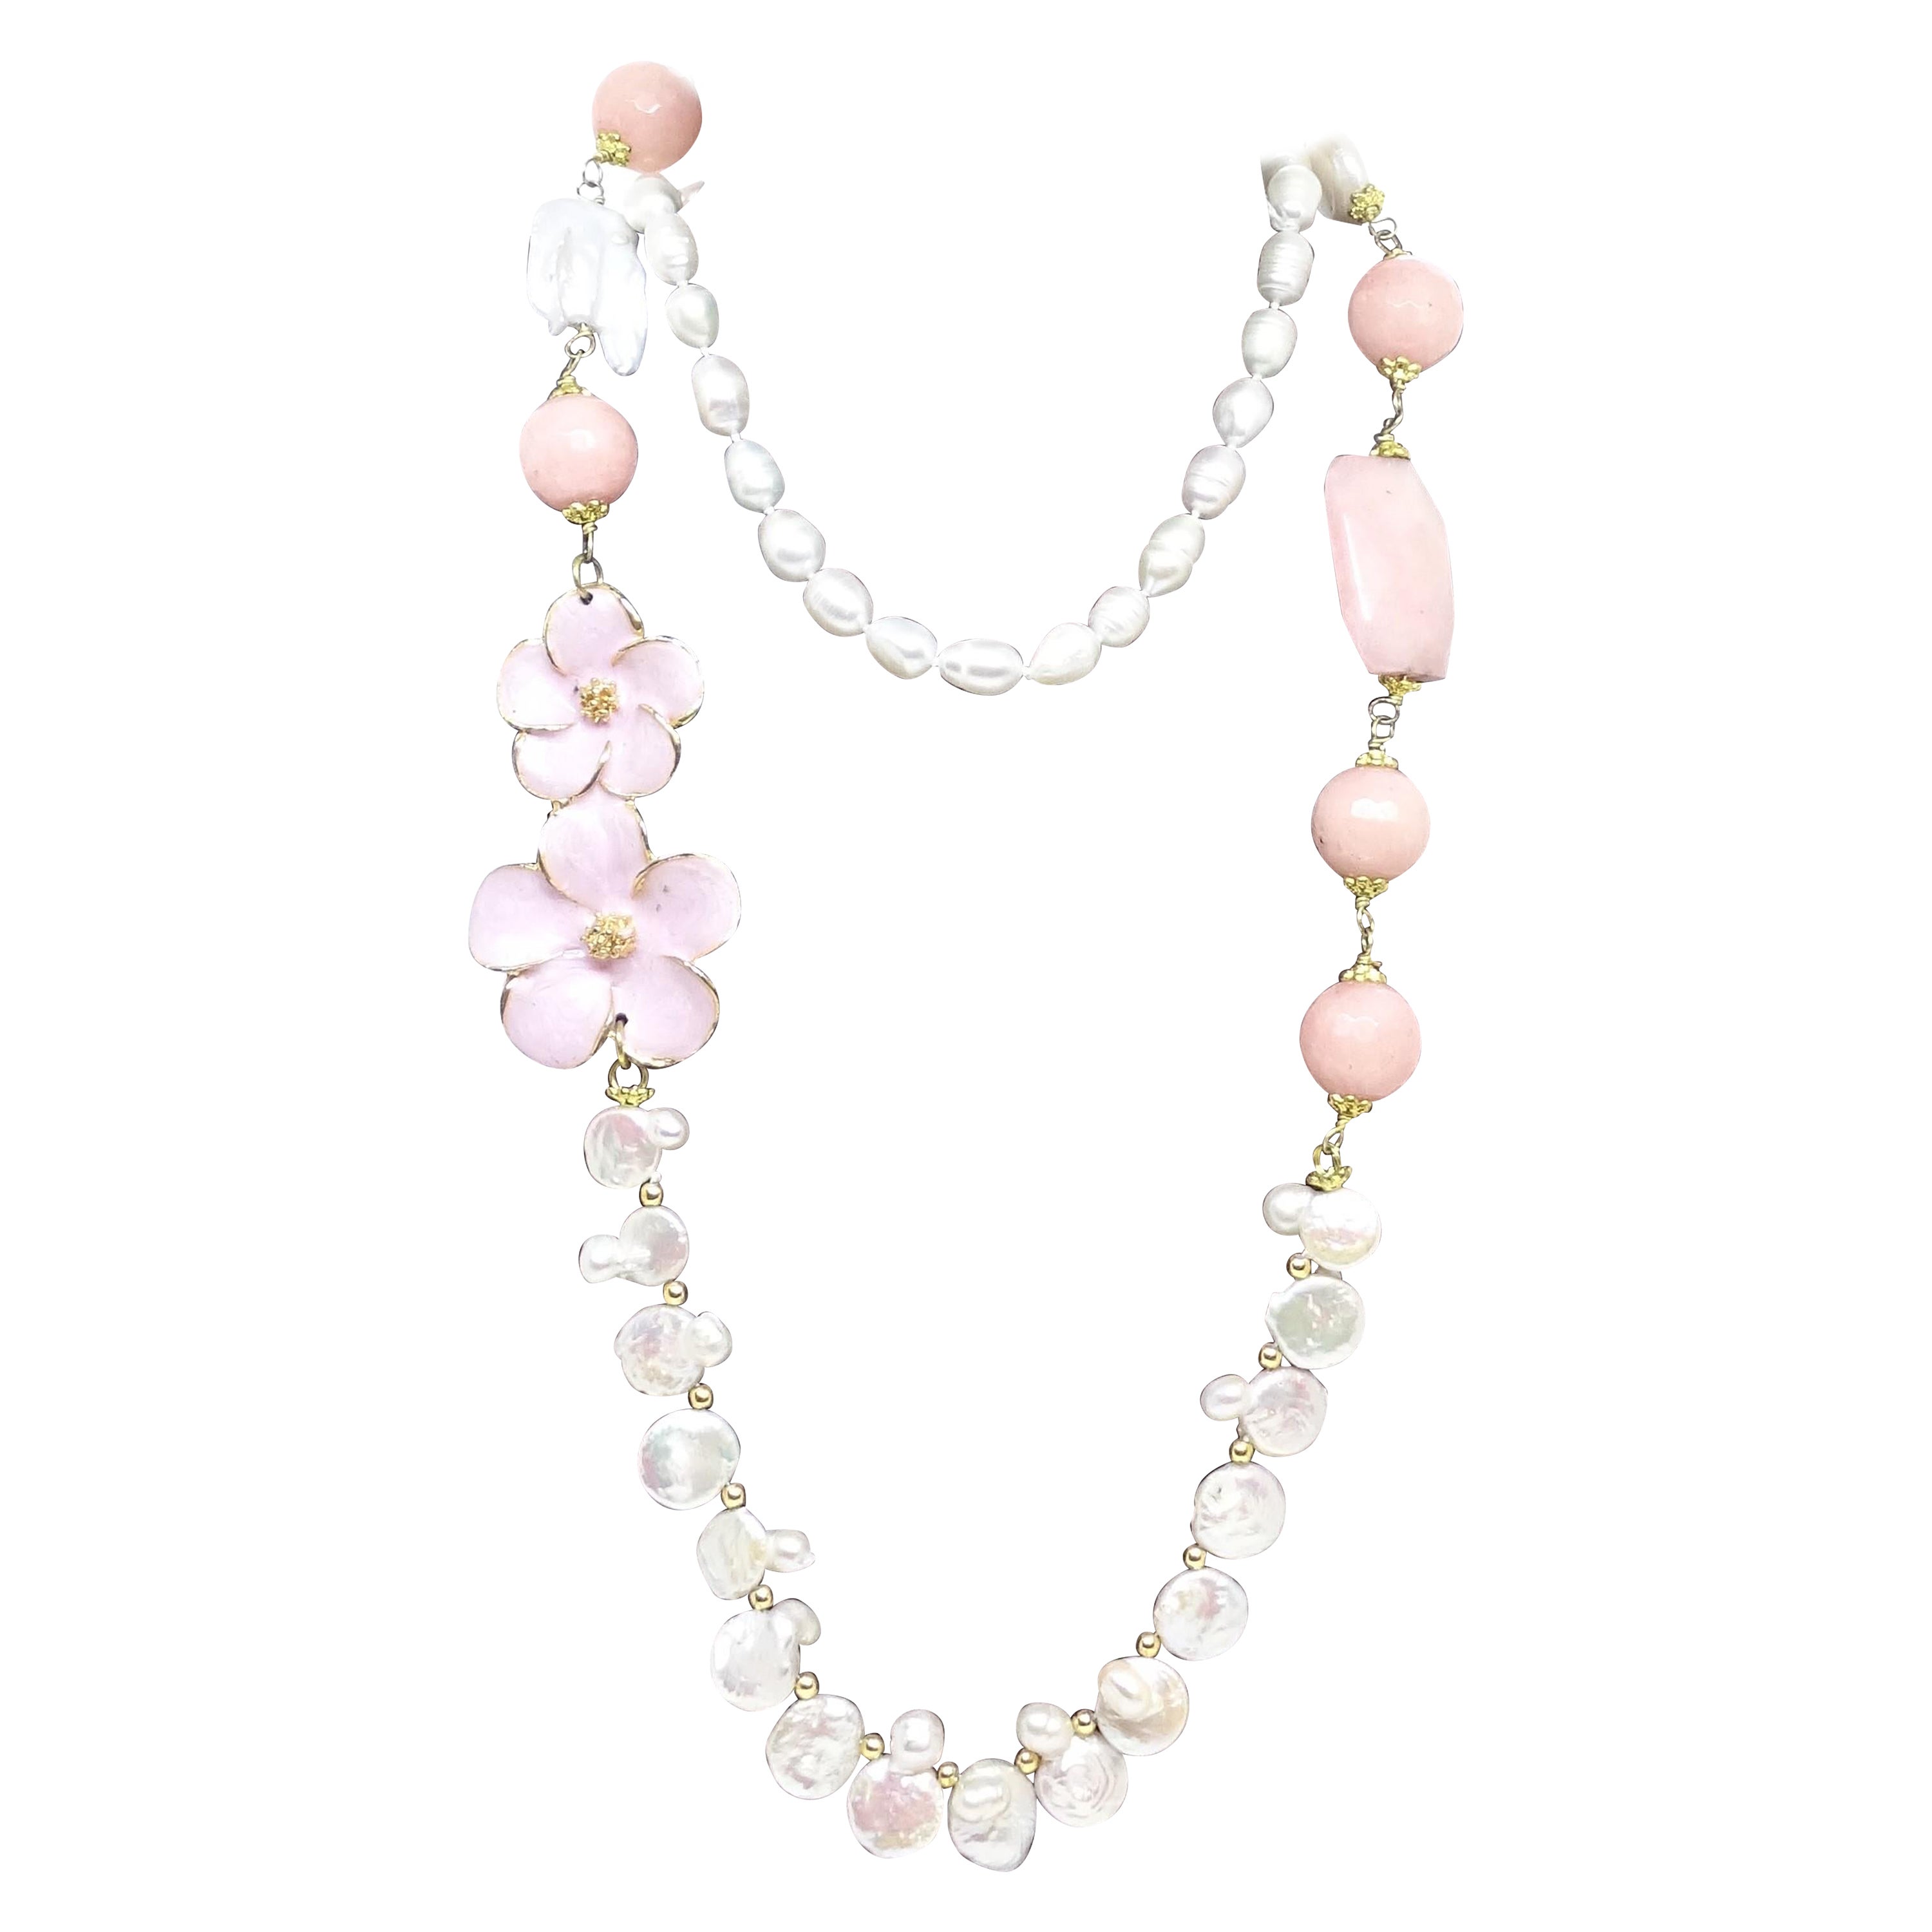 Italian necklace with baroque pearls, rose quartz and enamel.
Modern Italian Jewelry Piece with an original and unique design. The piece combines the color of freshwater or baroque pearls, without any polishing process and natural views; the pink